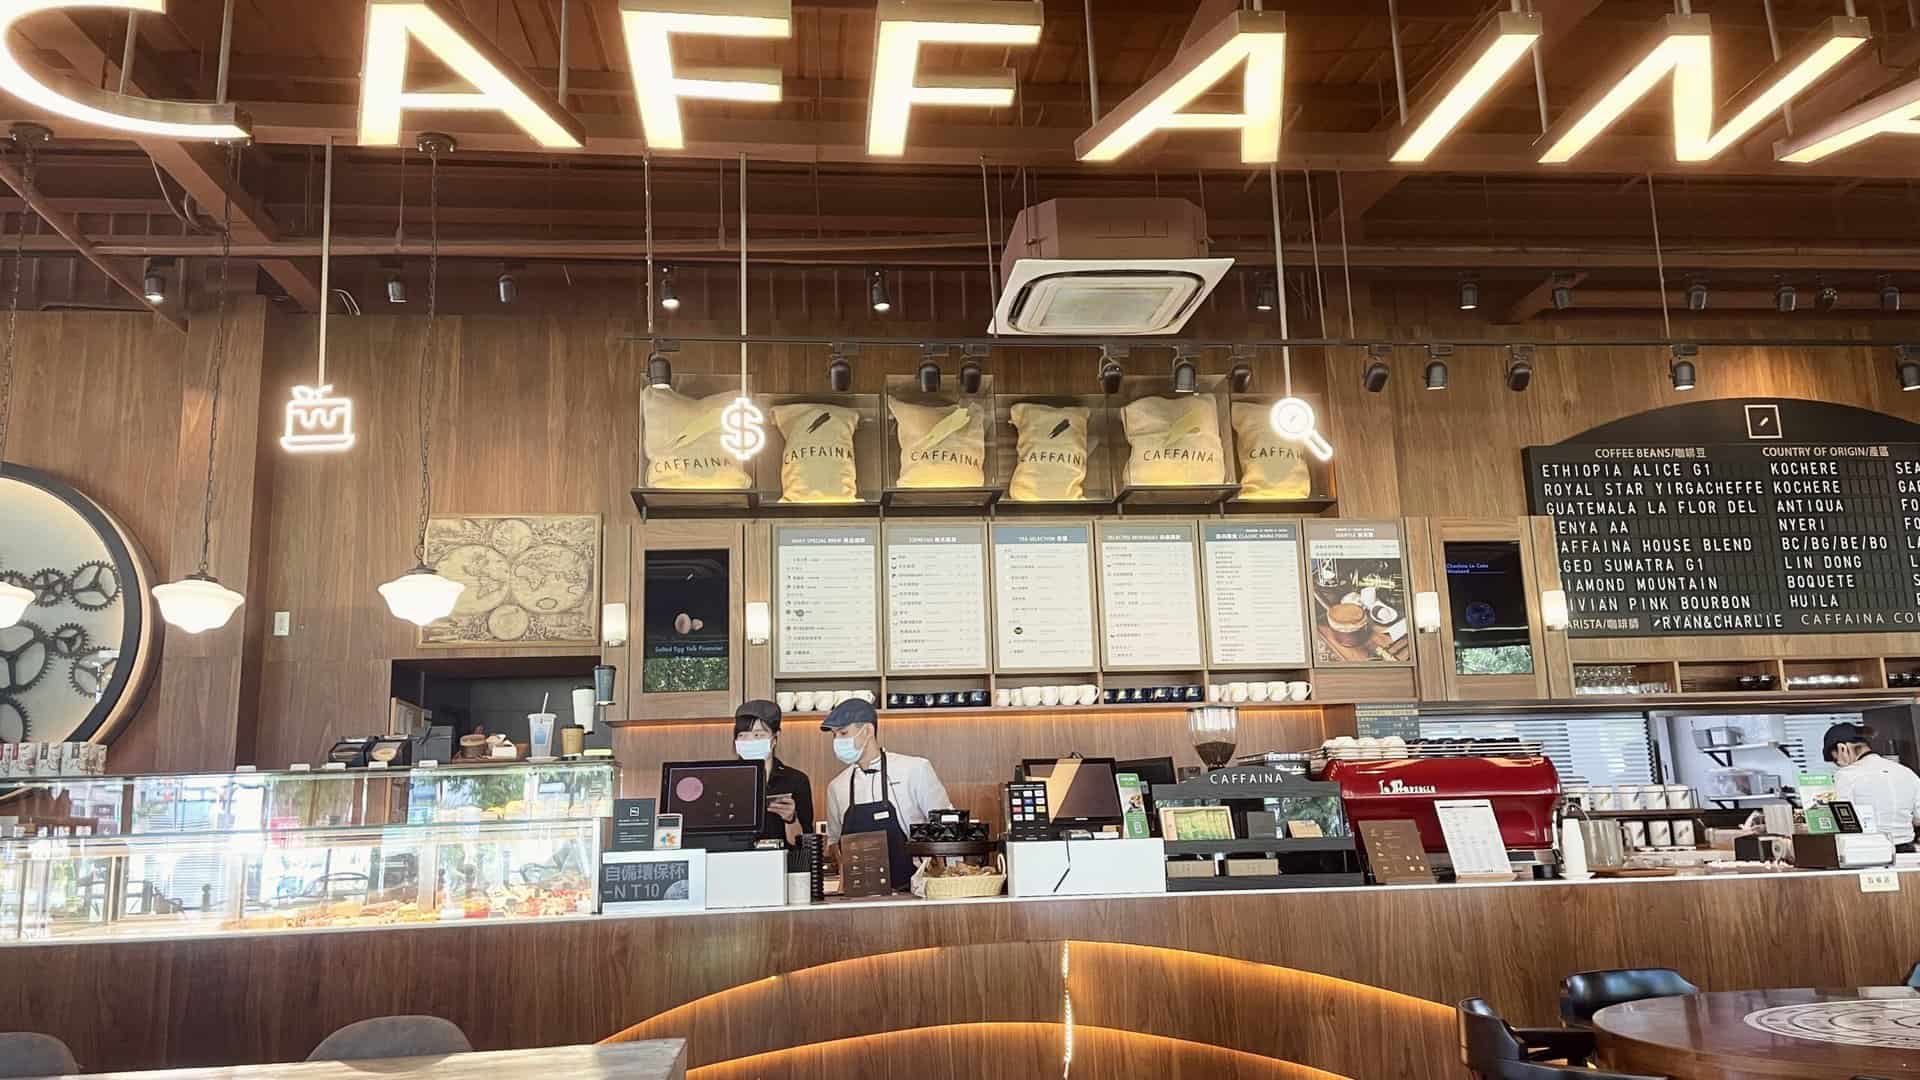 CAFFAINA: A Forest-Themed Coffee Shop with a Beautiful Afternoon Tea Experience